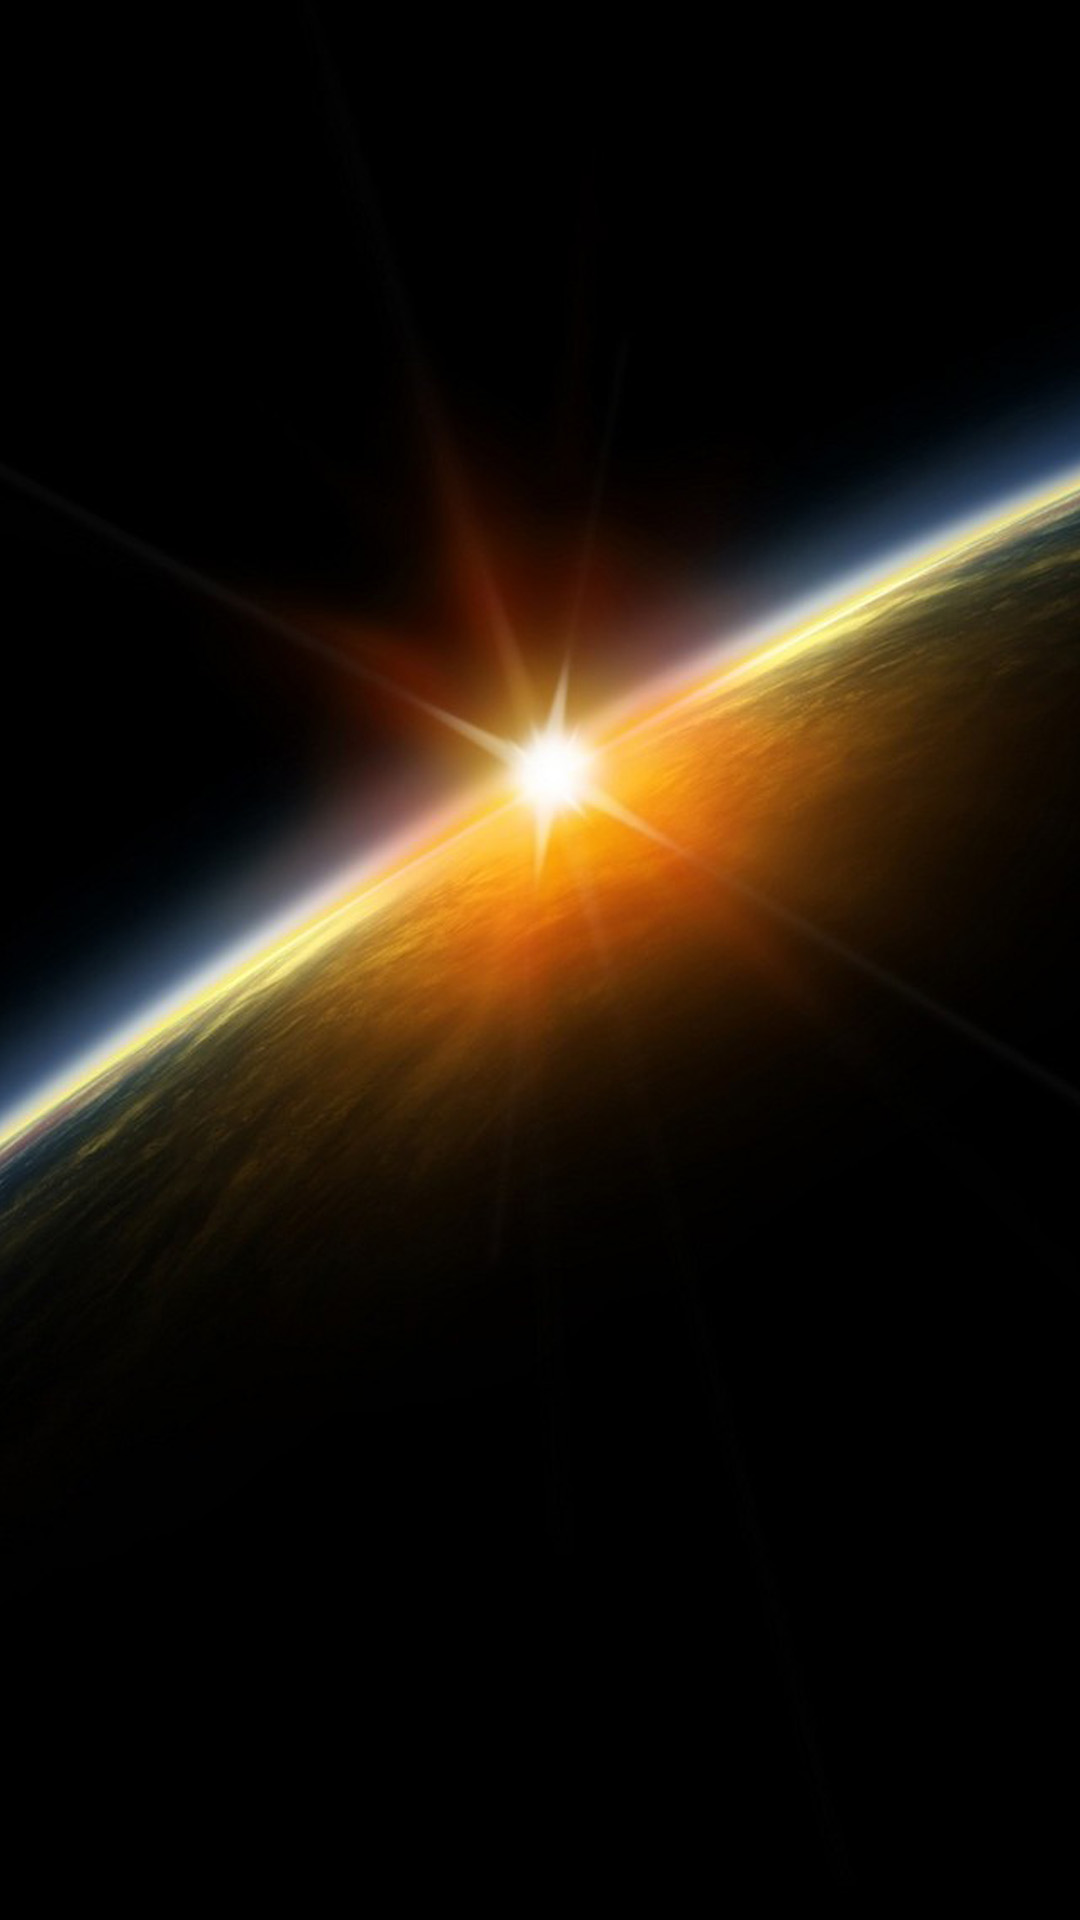 Light Across Space Android wallpaper